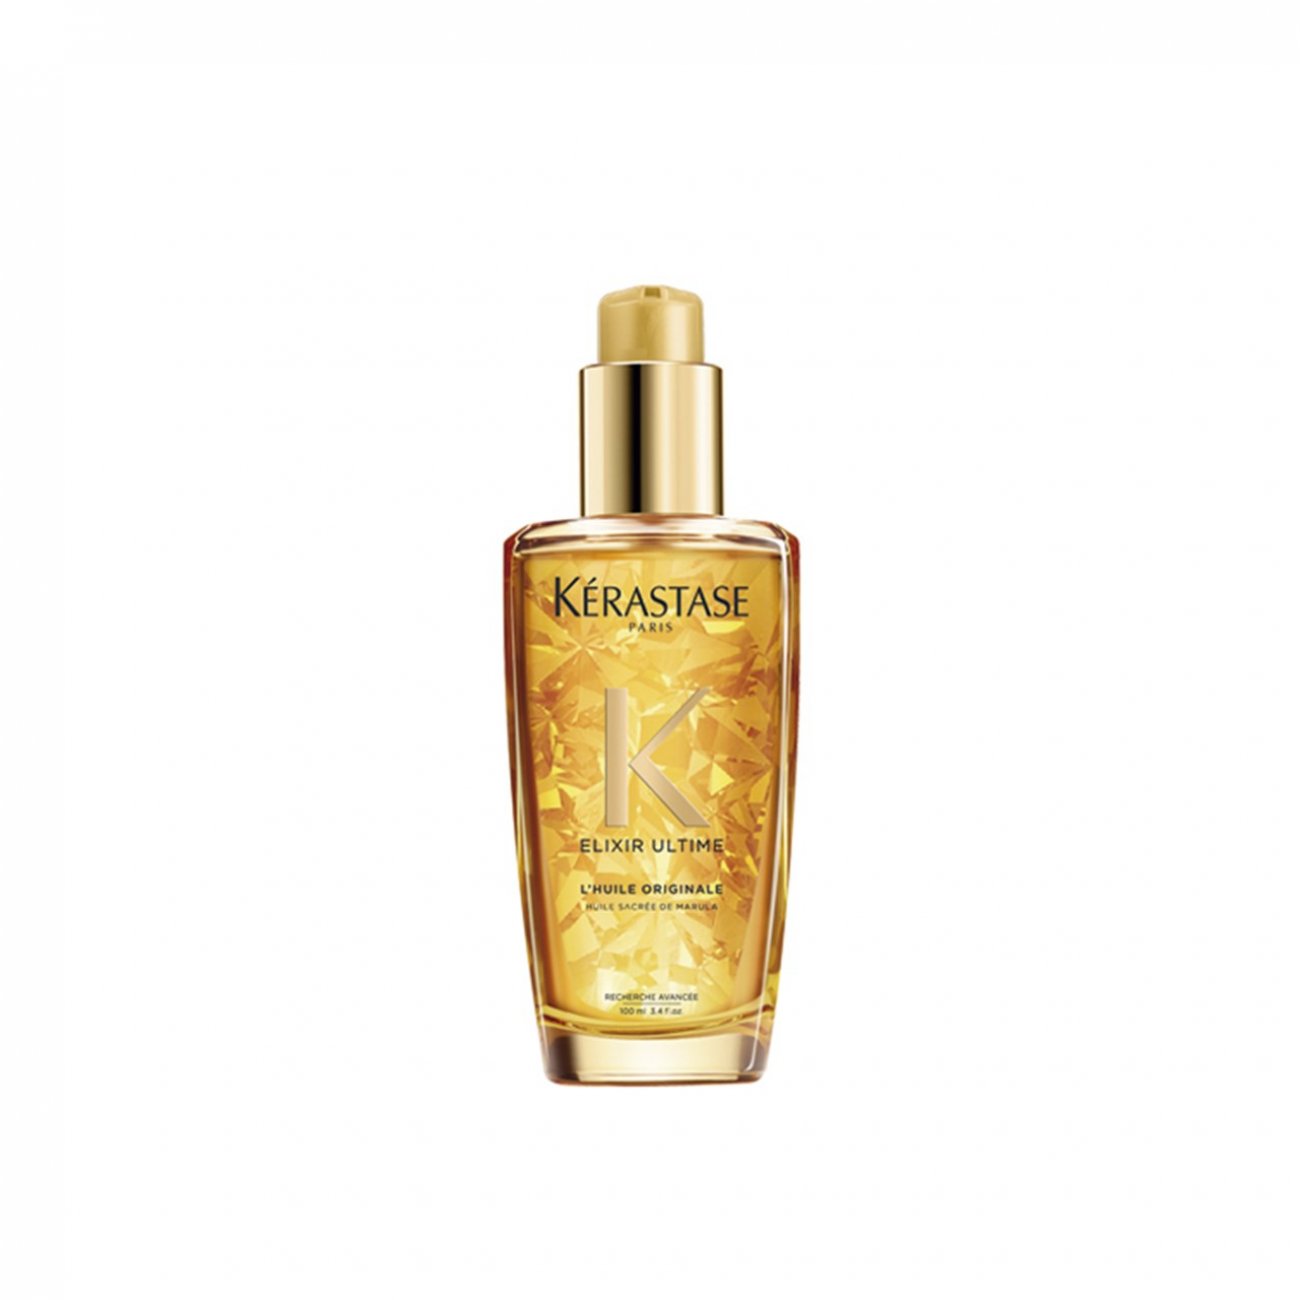 We Are Paradoxx Hangover Hair Elixir Oil 75ml  FREE Delivery